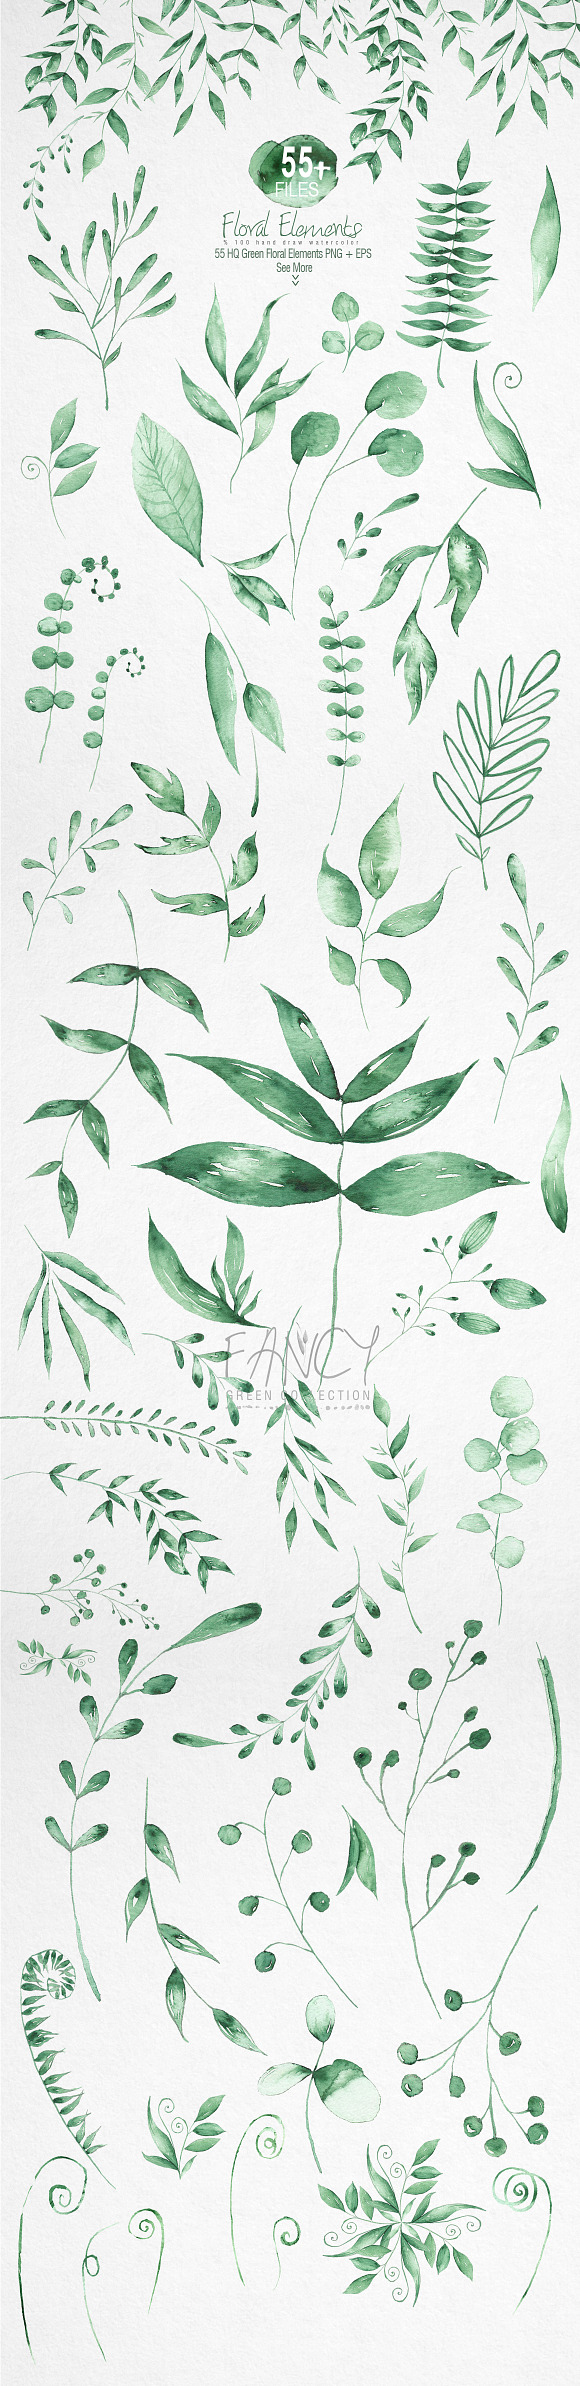 FANCY Green Collection %50 OFF in Illustrations - product preview 1